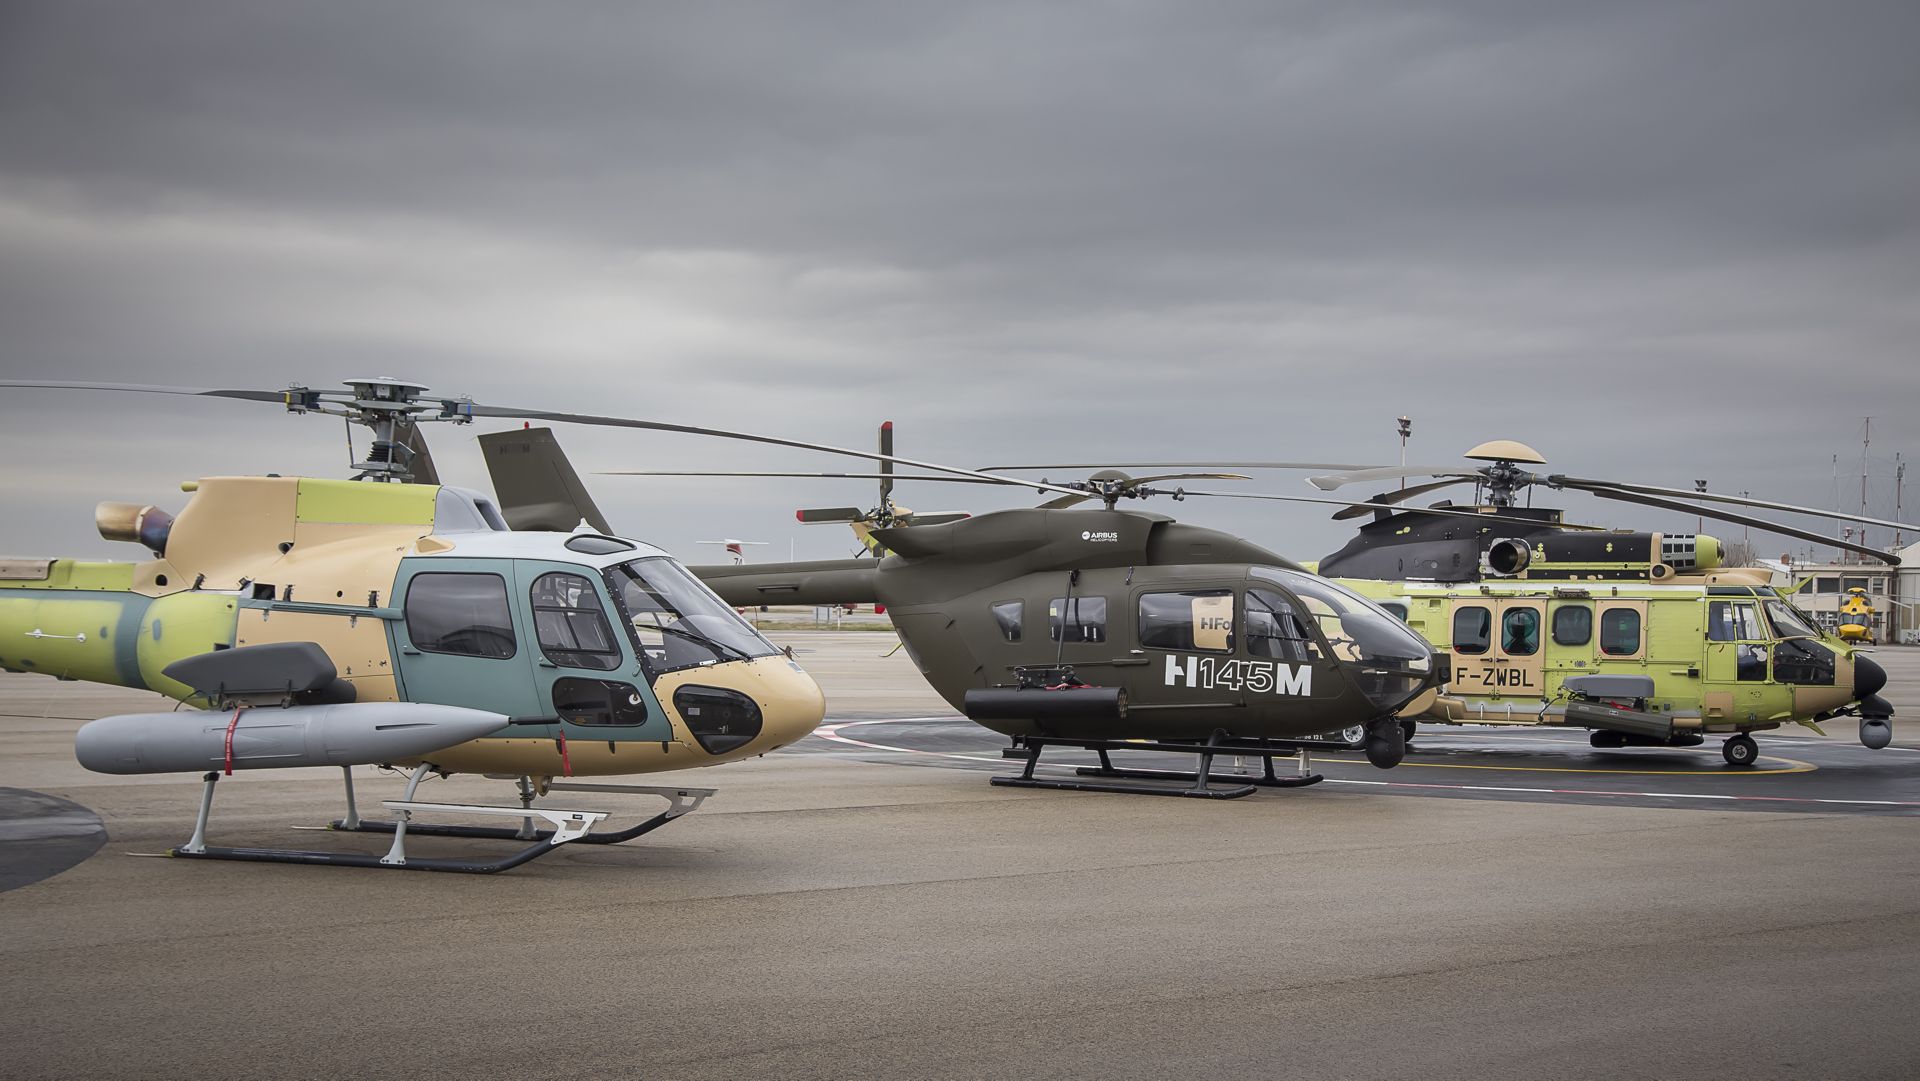 Airbus Helicopters HForce